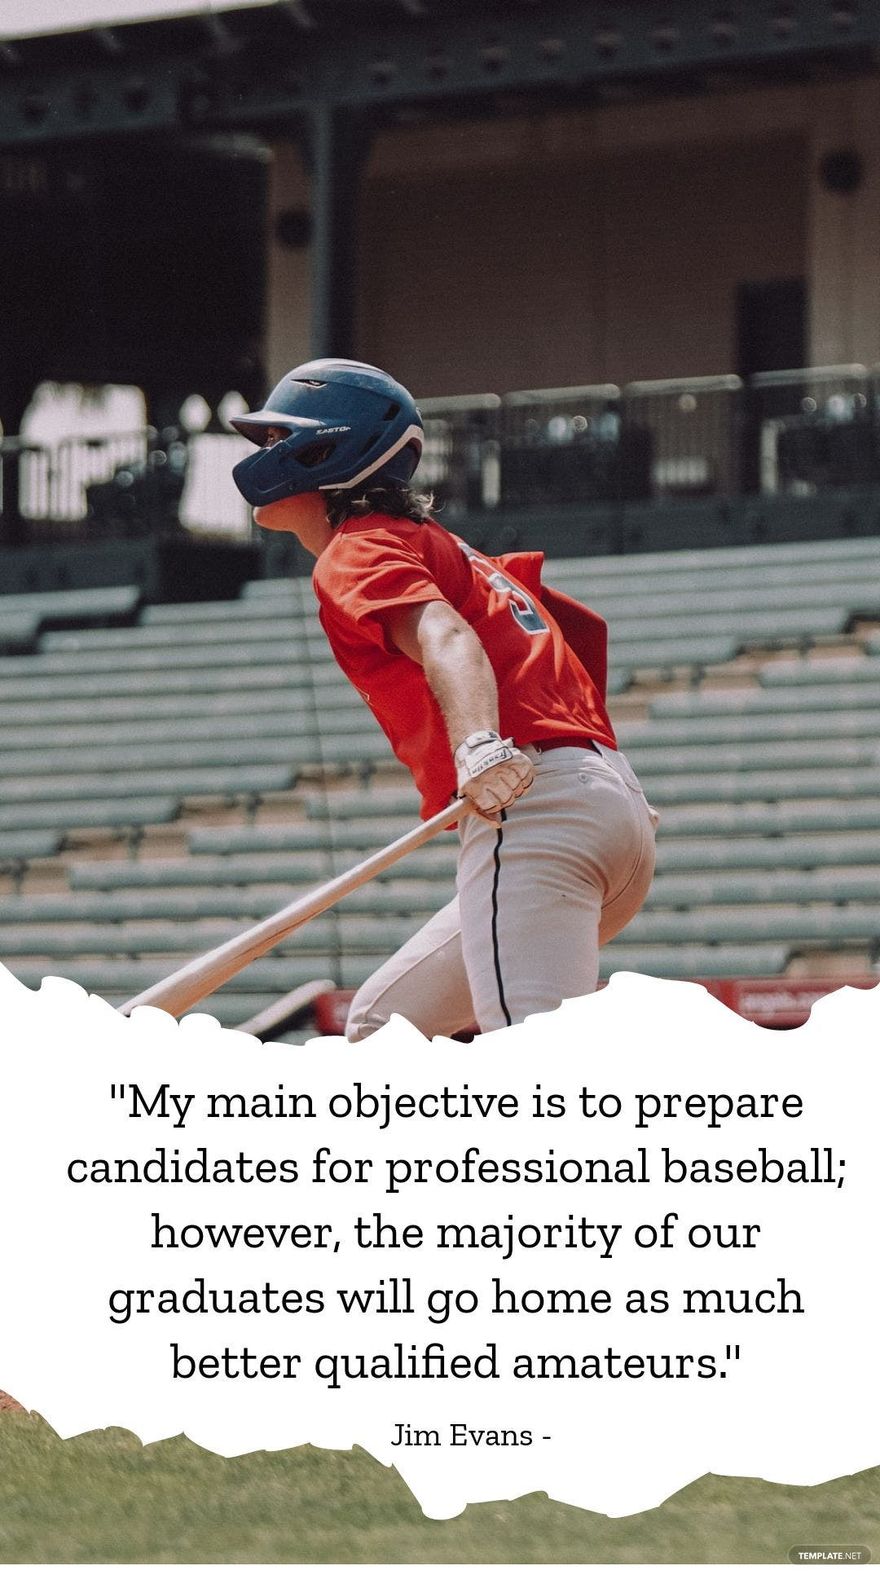 Jim Evans - My main objective is to prepare candidates for professional baseball; however, the majority of our graduates will go home as much better qualified amateurs.